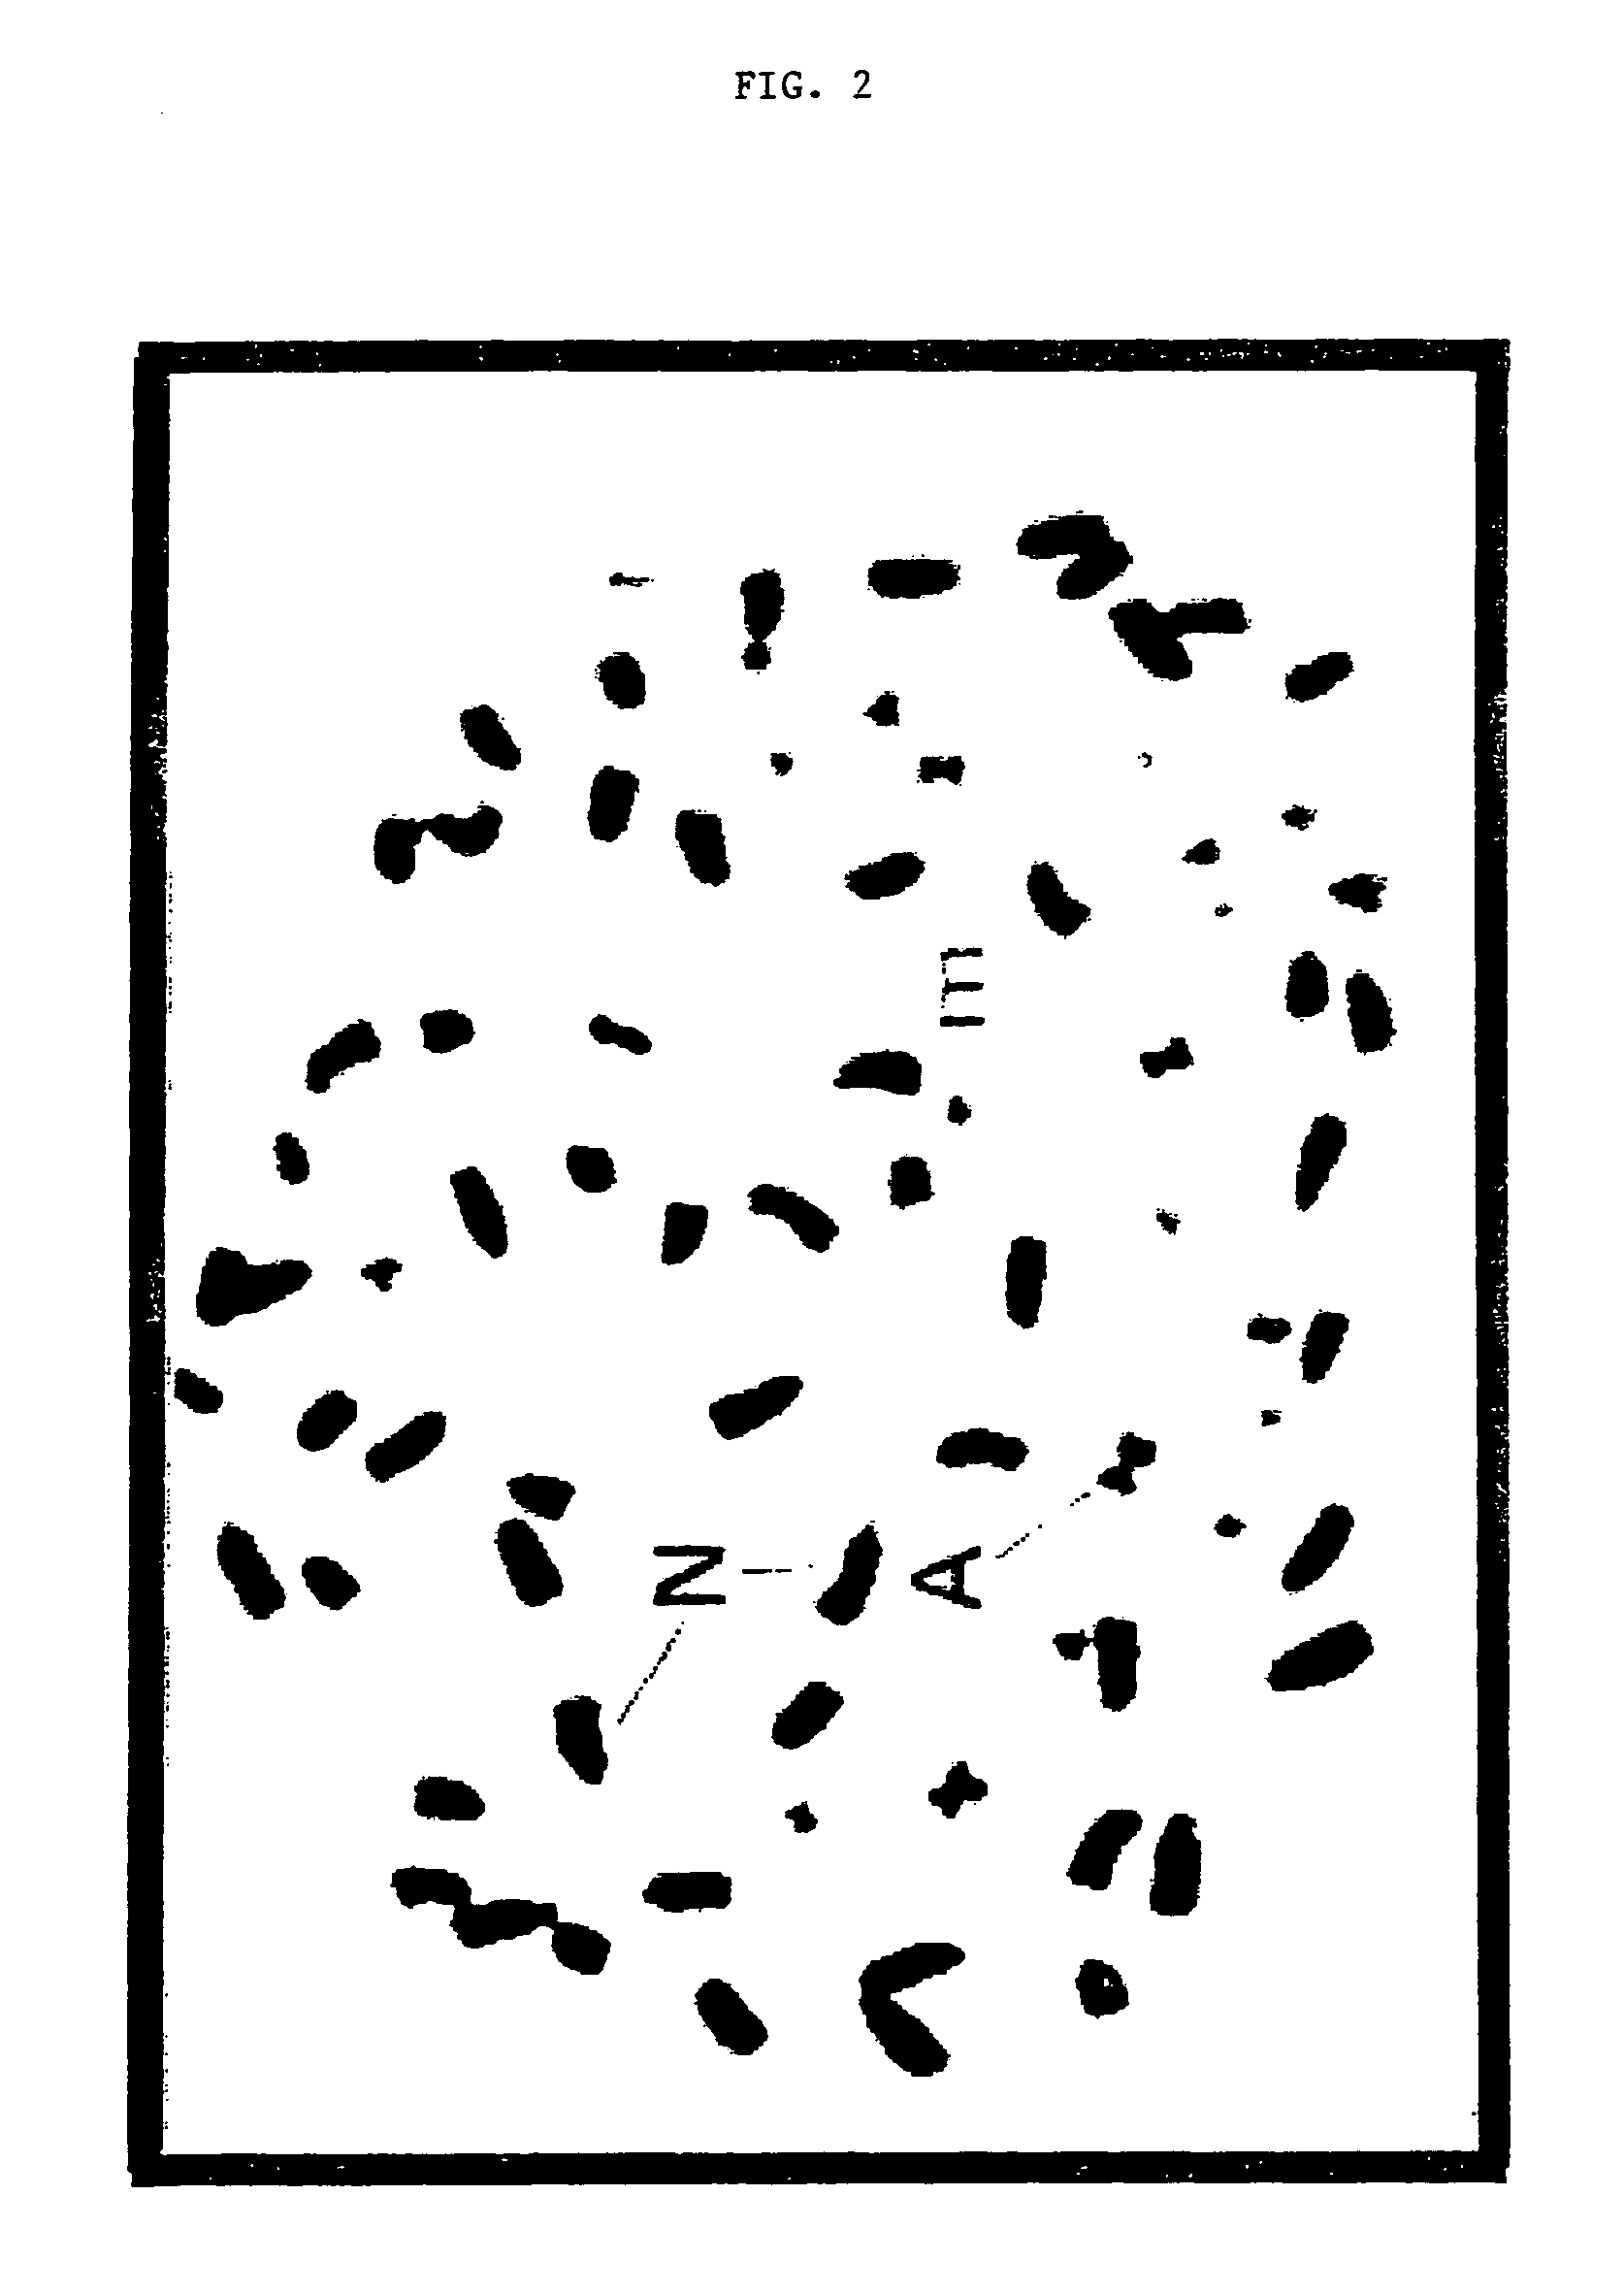 Method of making plant artificial chromosomes